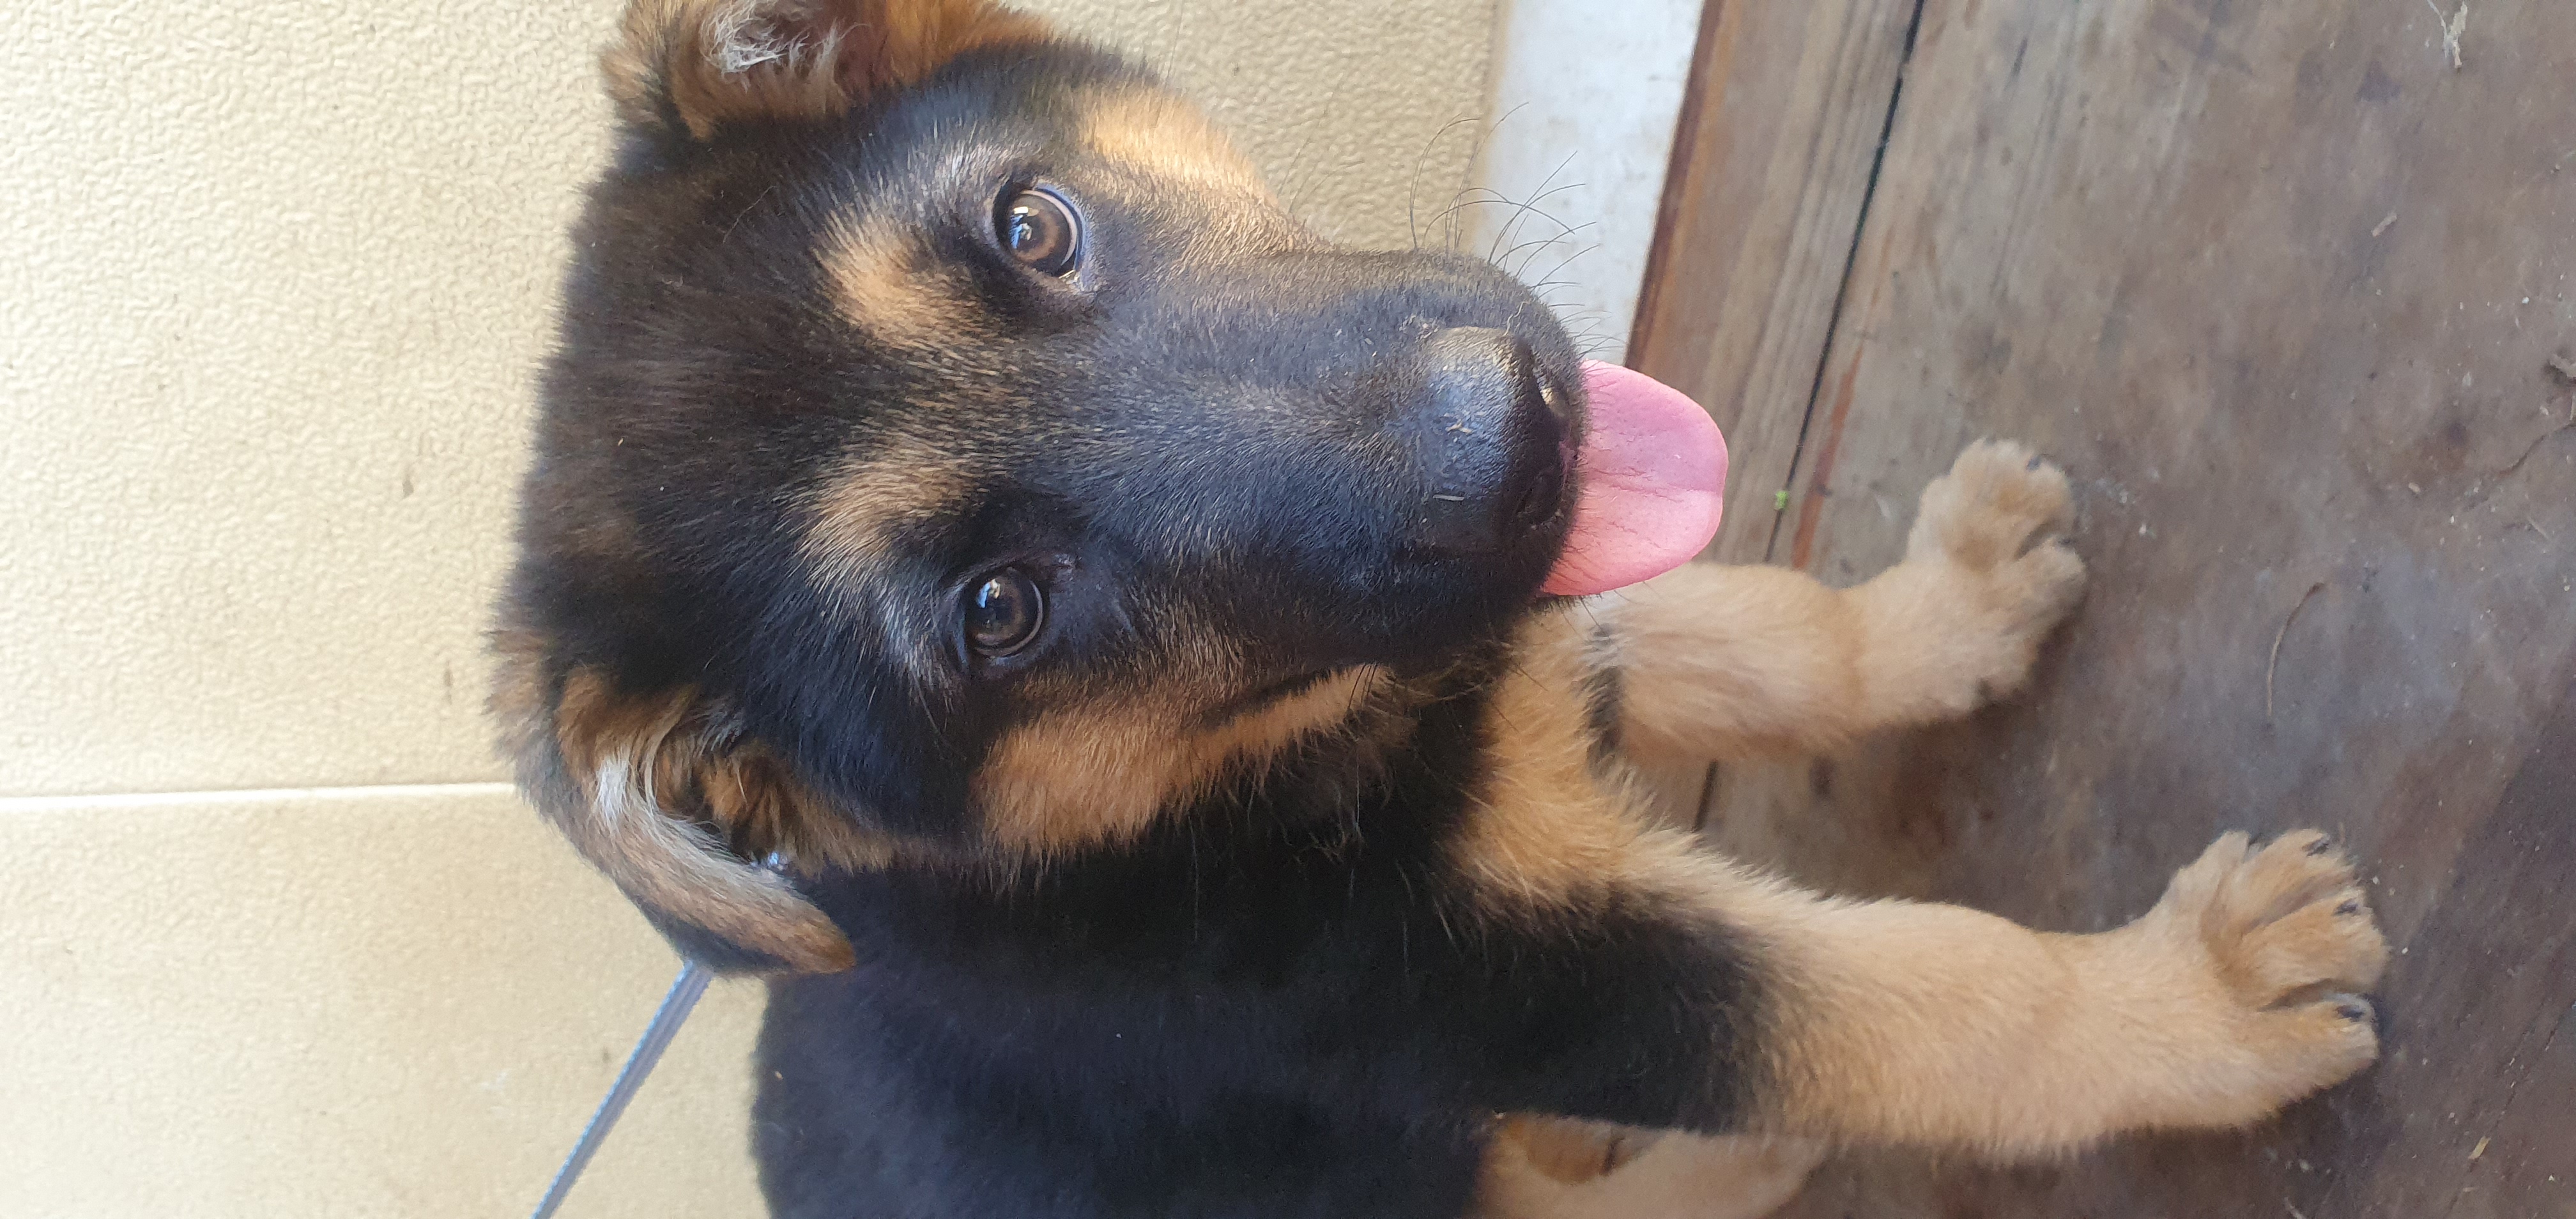 Pure German Shepherd pups available